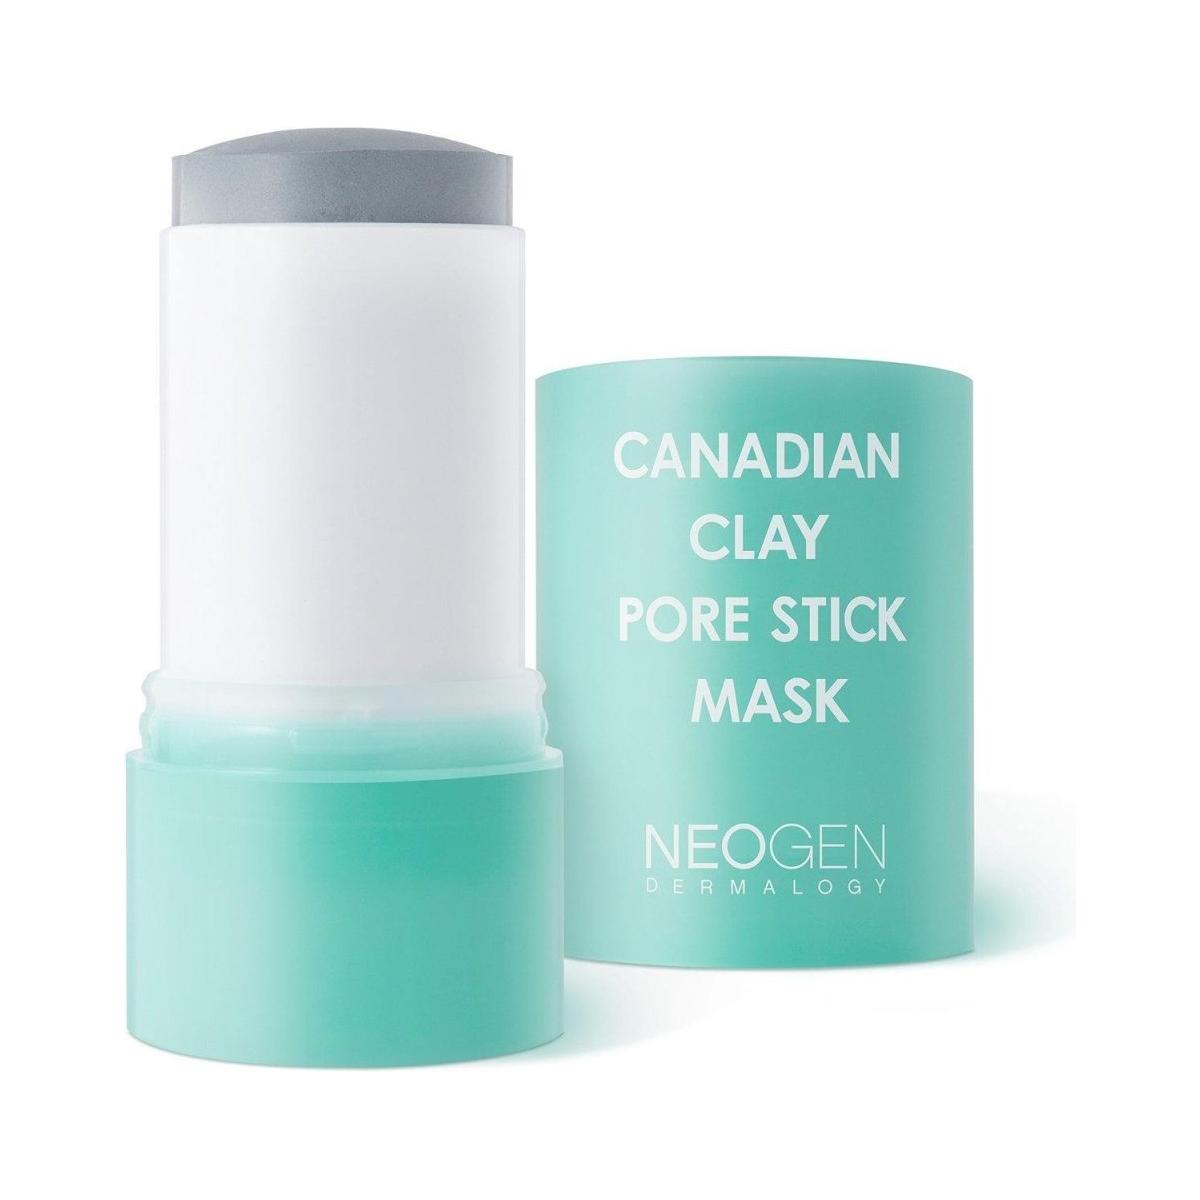 NEOGEN Canadian Clay Pore Stick 28g - Glam Global UK